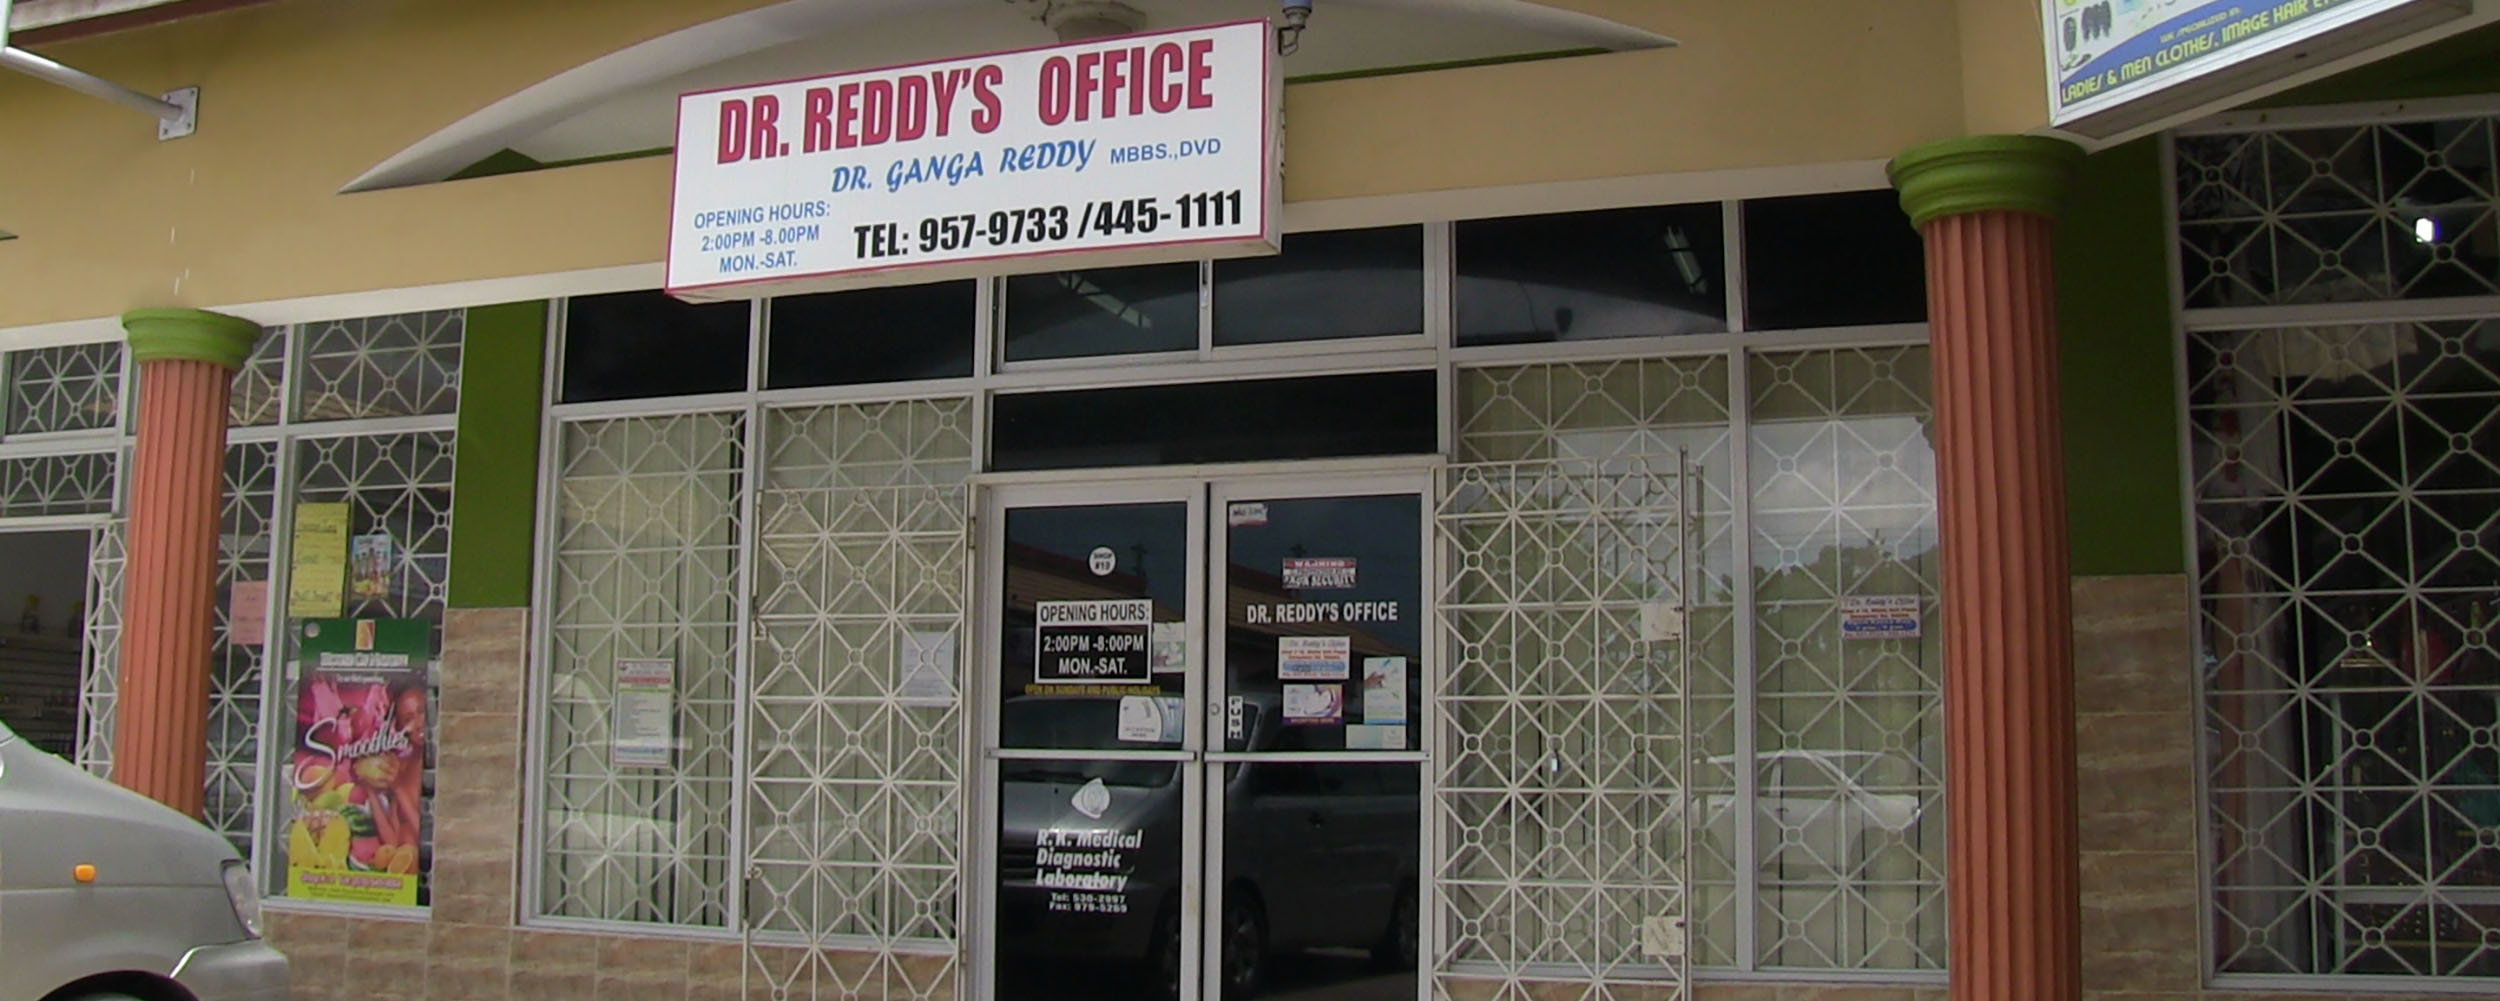 Dr. Reddy's Office - White Hall Plaza - Nonpareil Road, Negril Jamaica